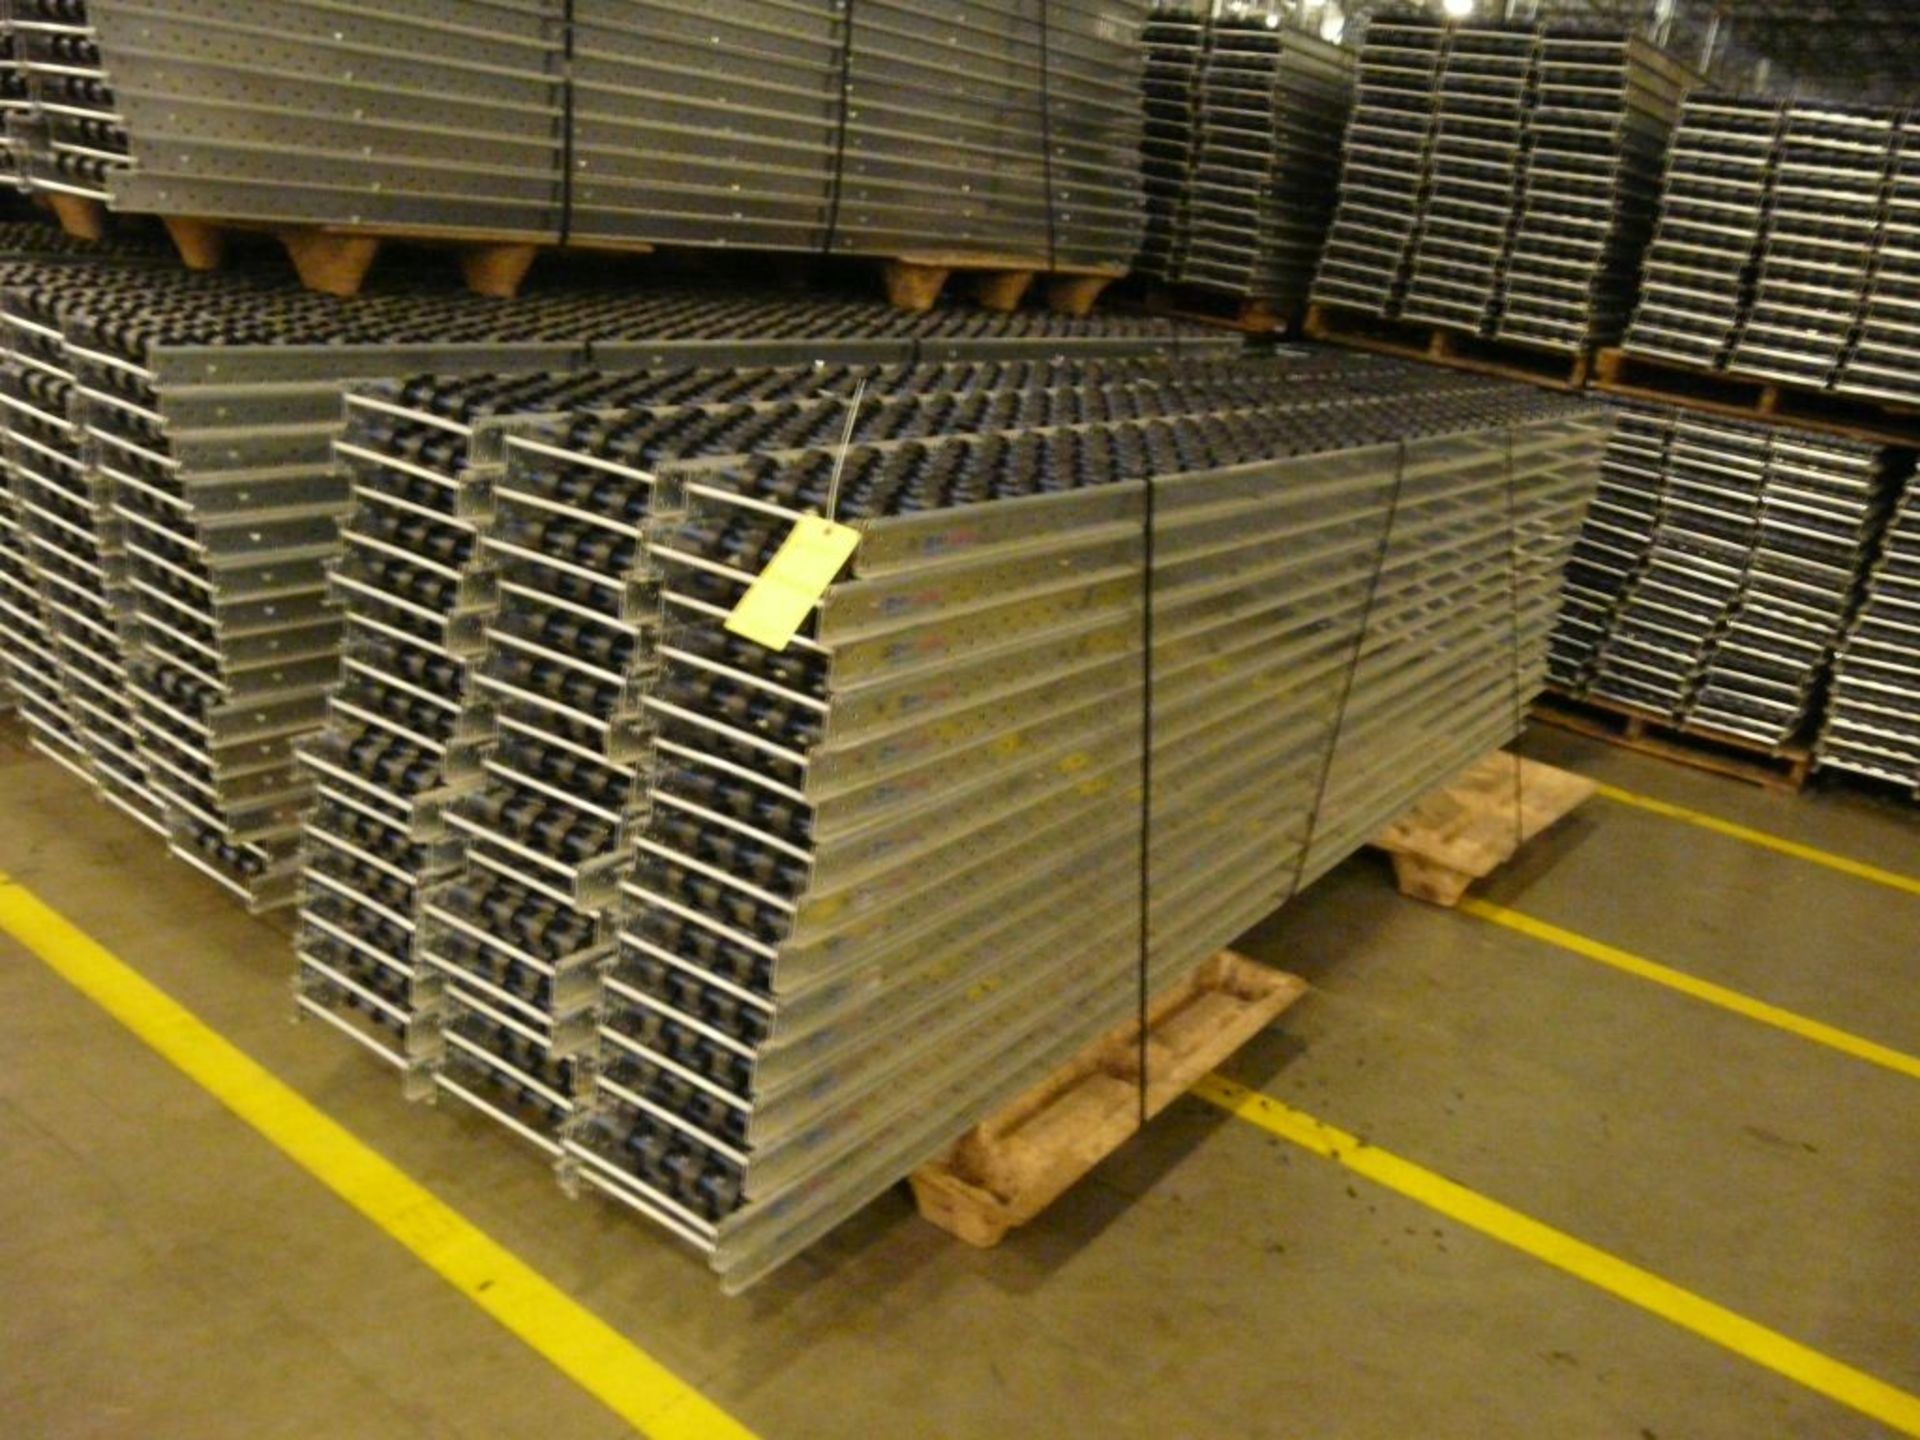 Lot of (90) SpanTrack Wheelbed Carton Flow Conveyors - 11.5'L x 11"W; Tag: 224195 - $30 Lot